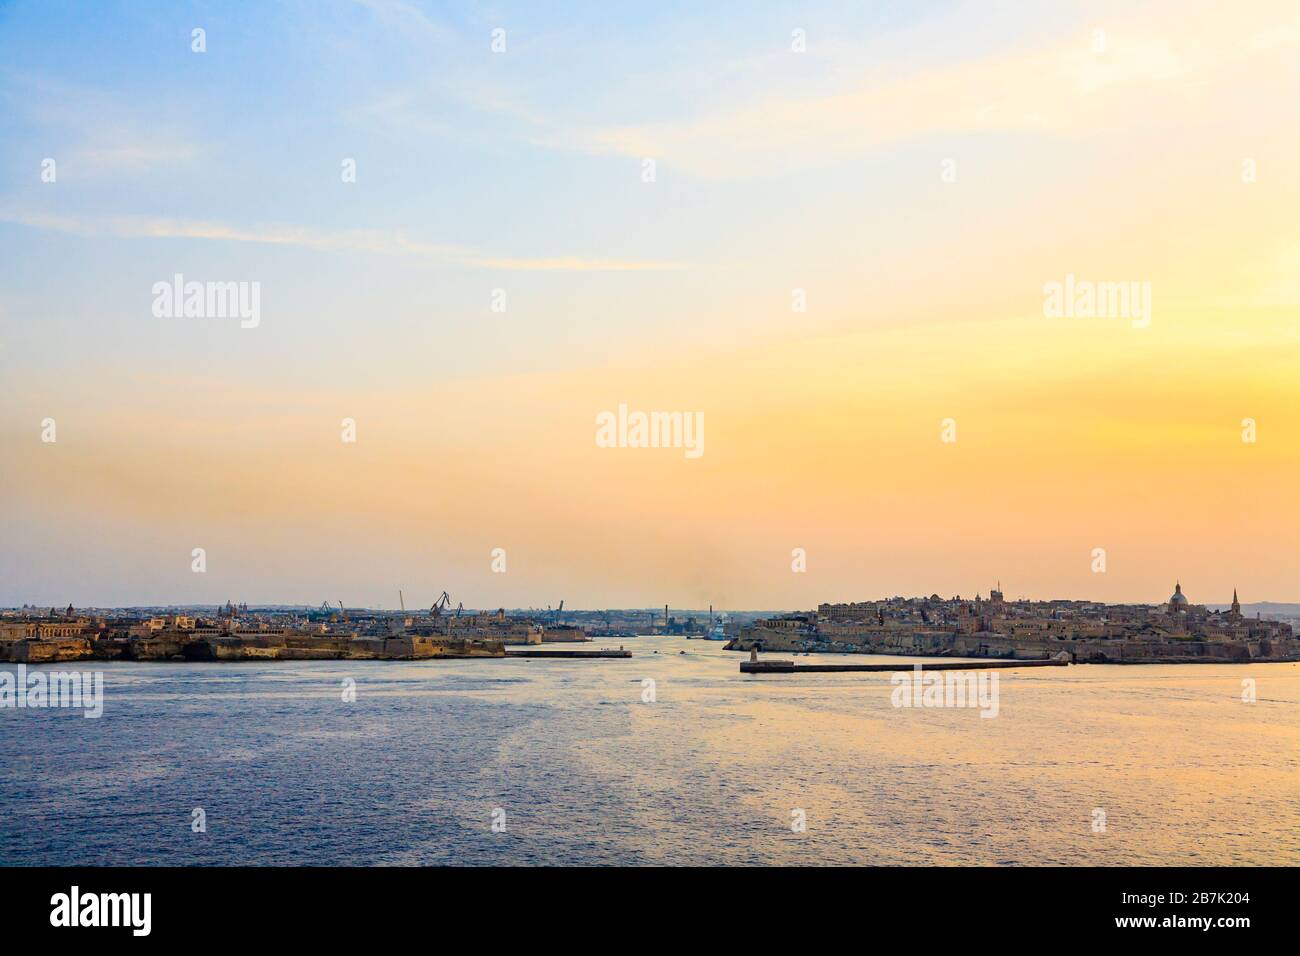 Iconic panoramic view of the entrance to Grand Harbour and city skyline in the evening at sunset, Valletta, capital city of Malta Stock Photo